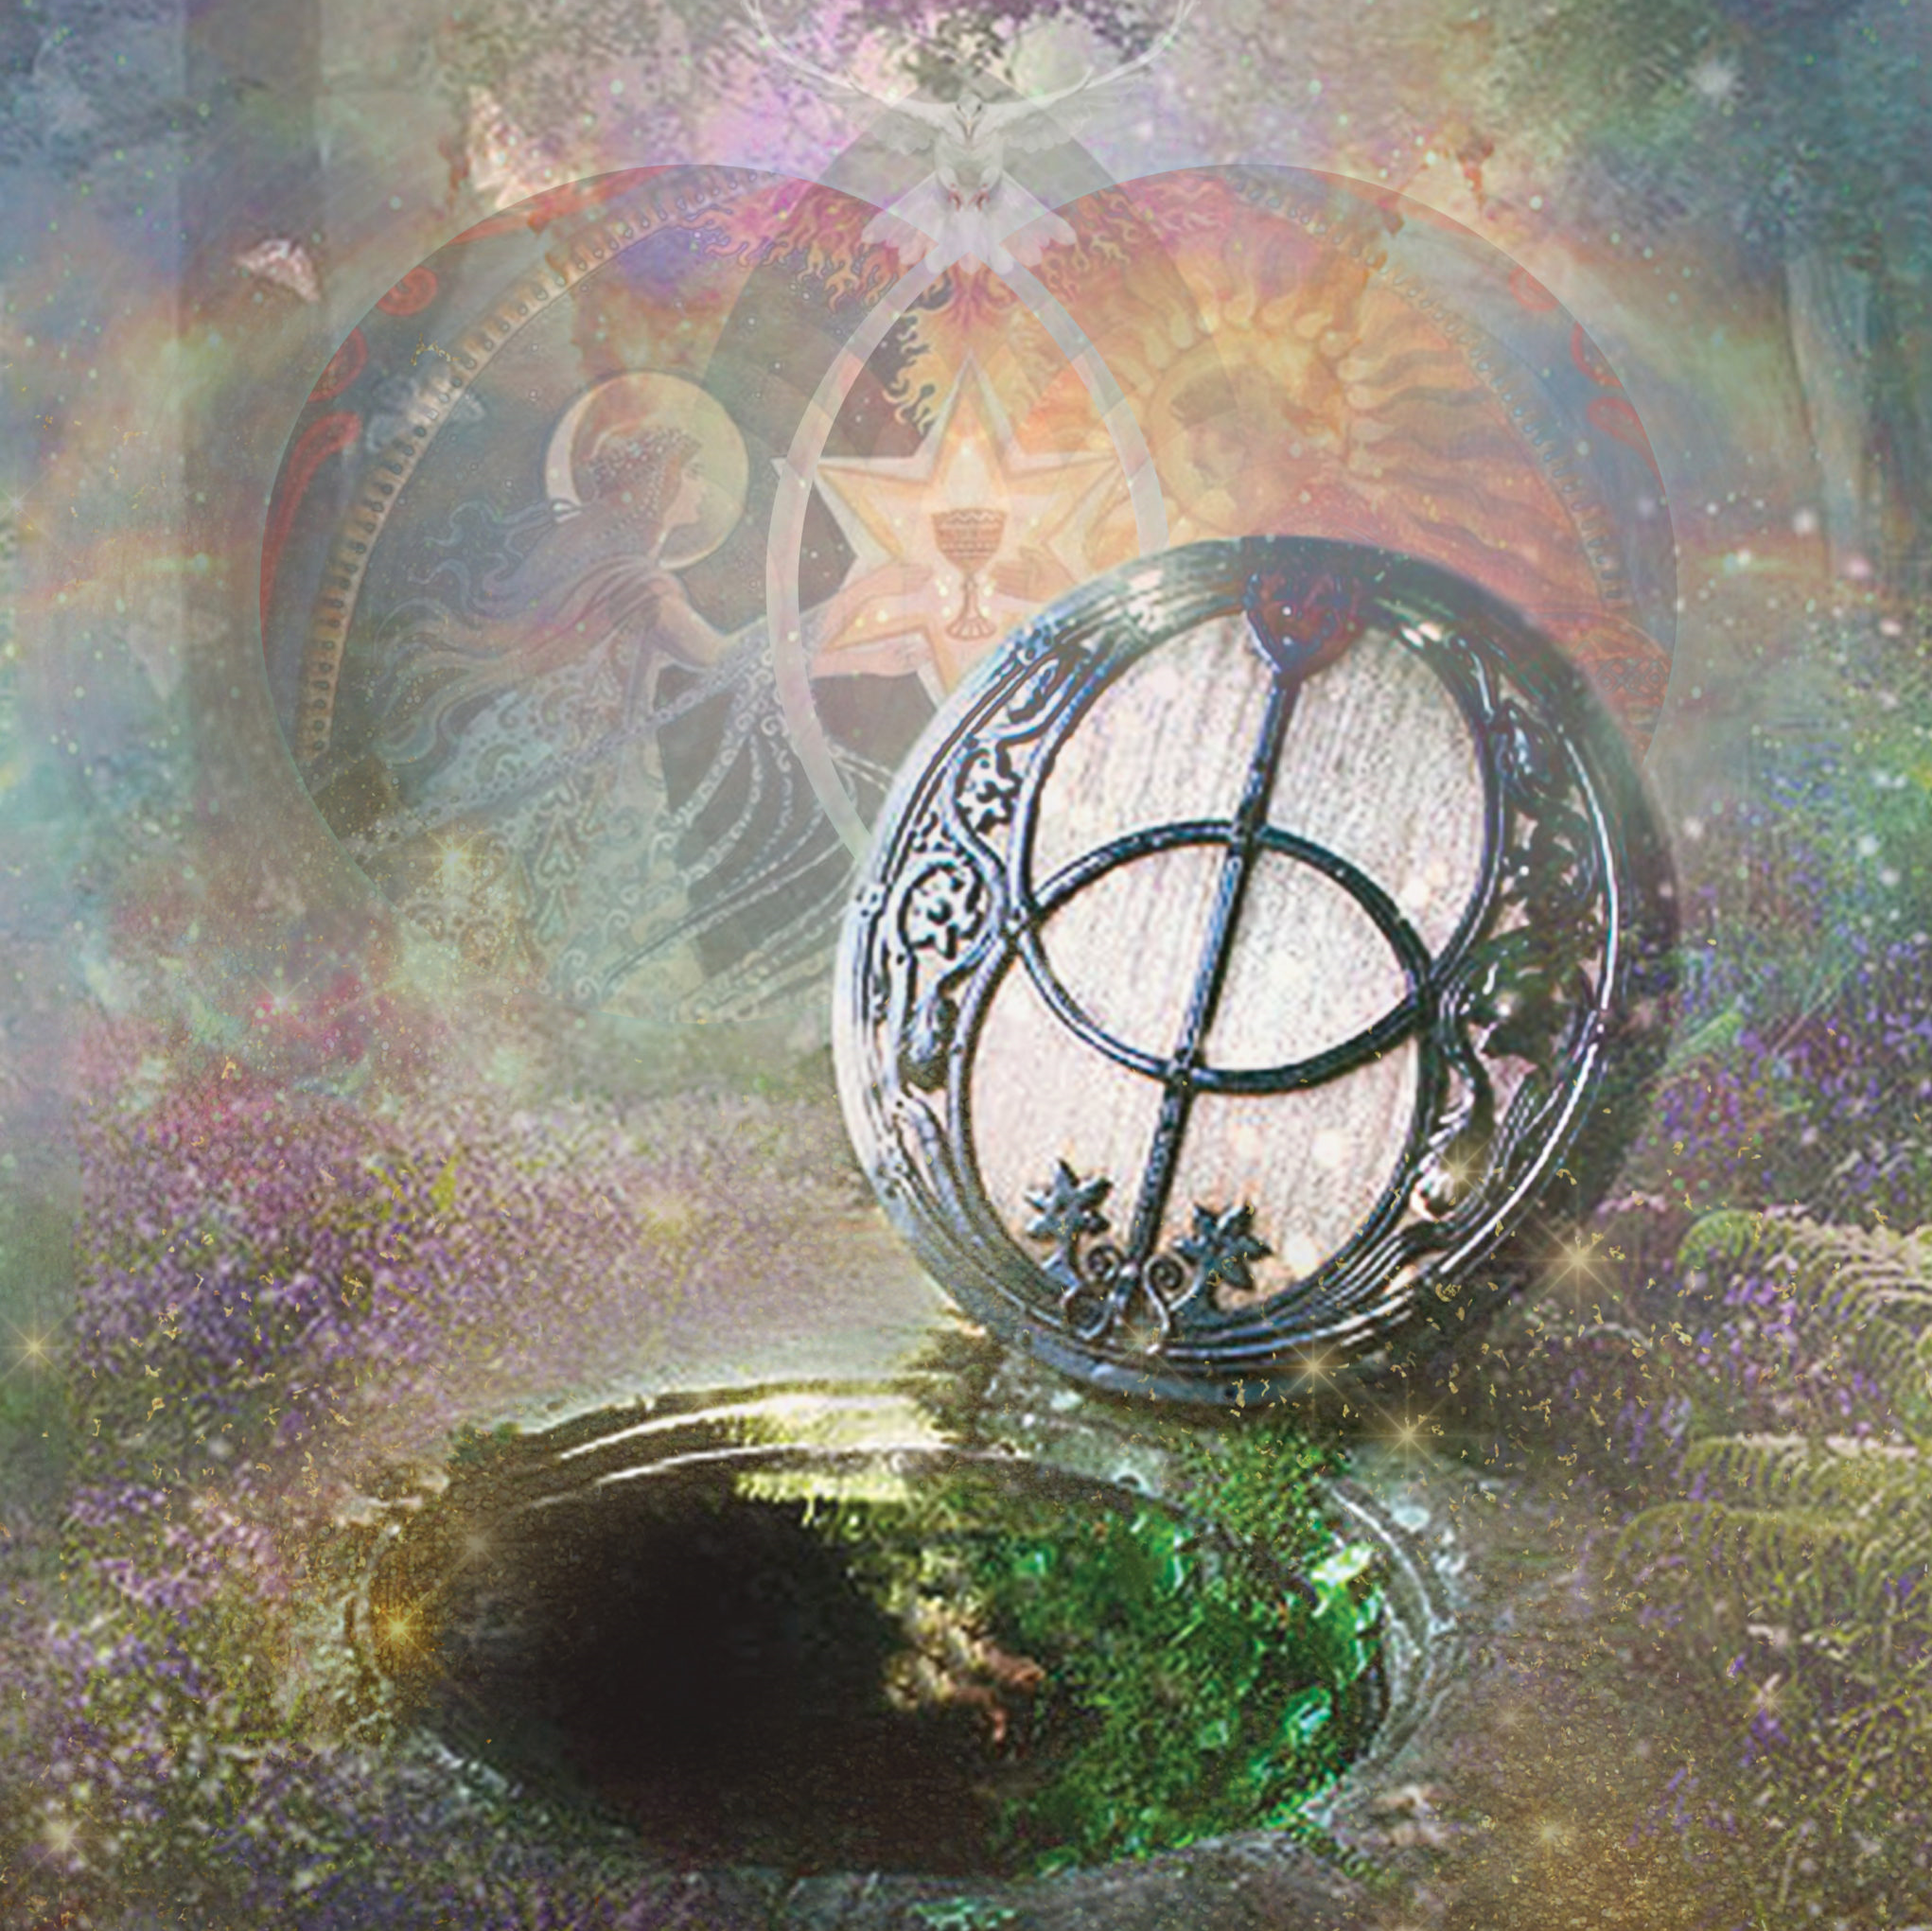 Chalice Well where the Red and White springs of Avalon unite to create an Alchemical Union of the Divine